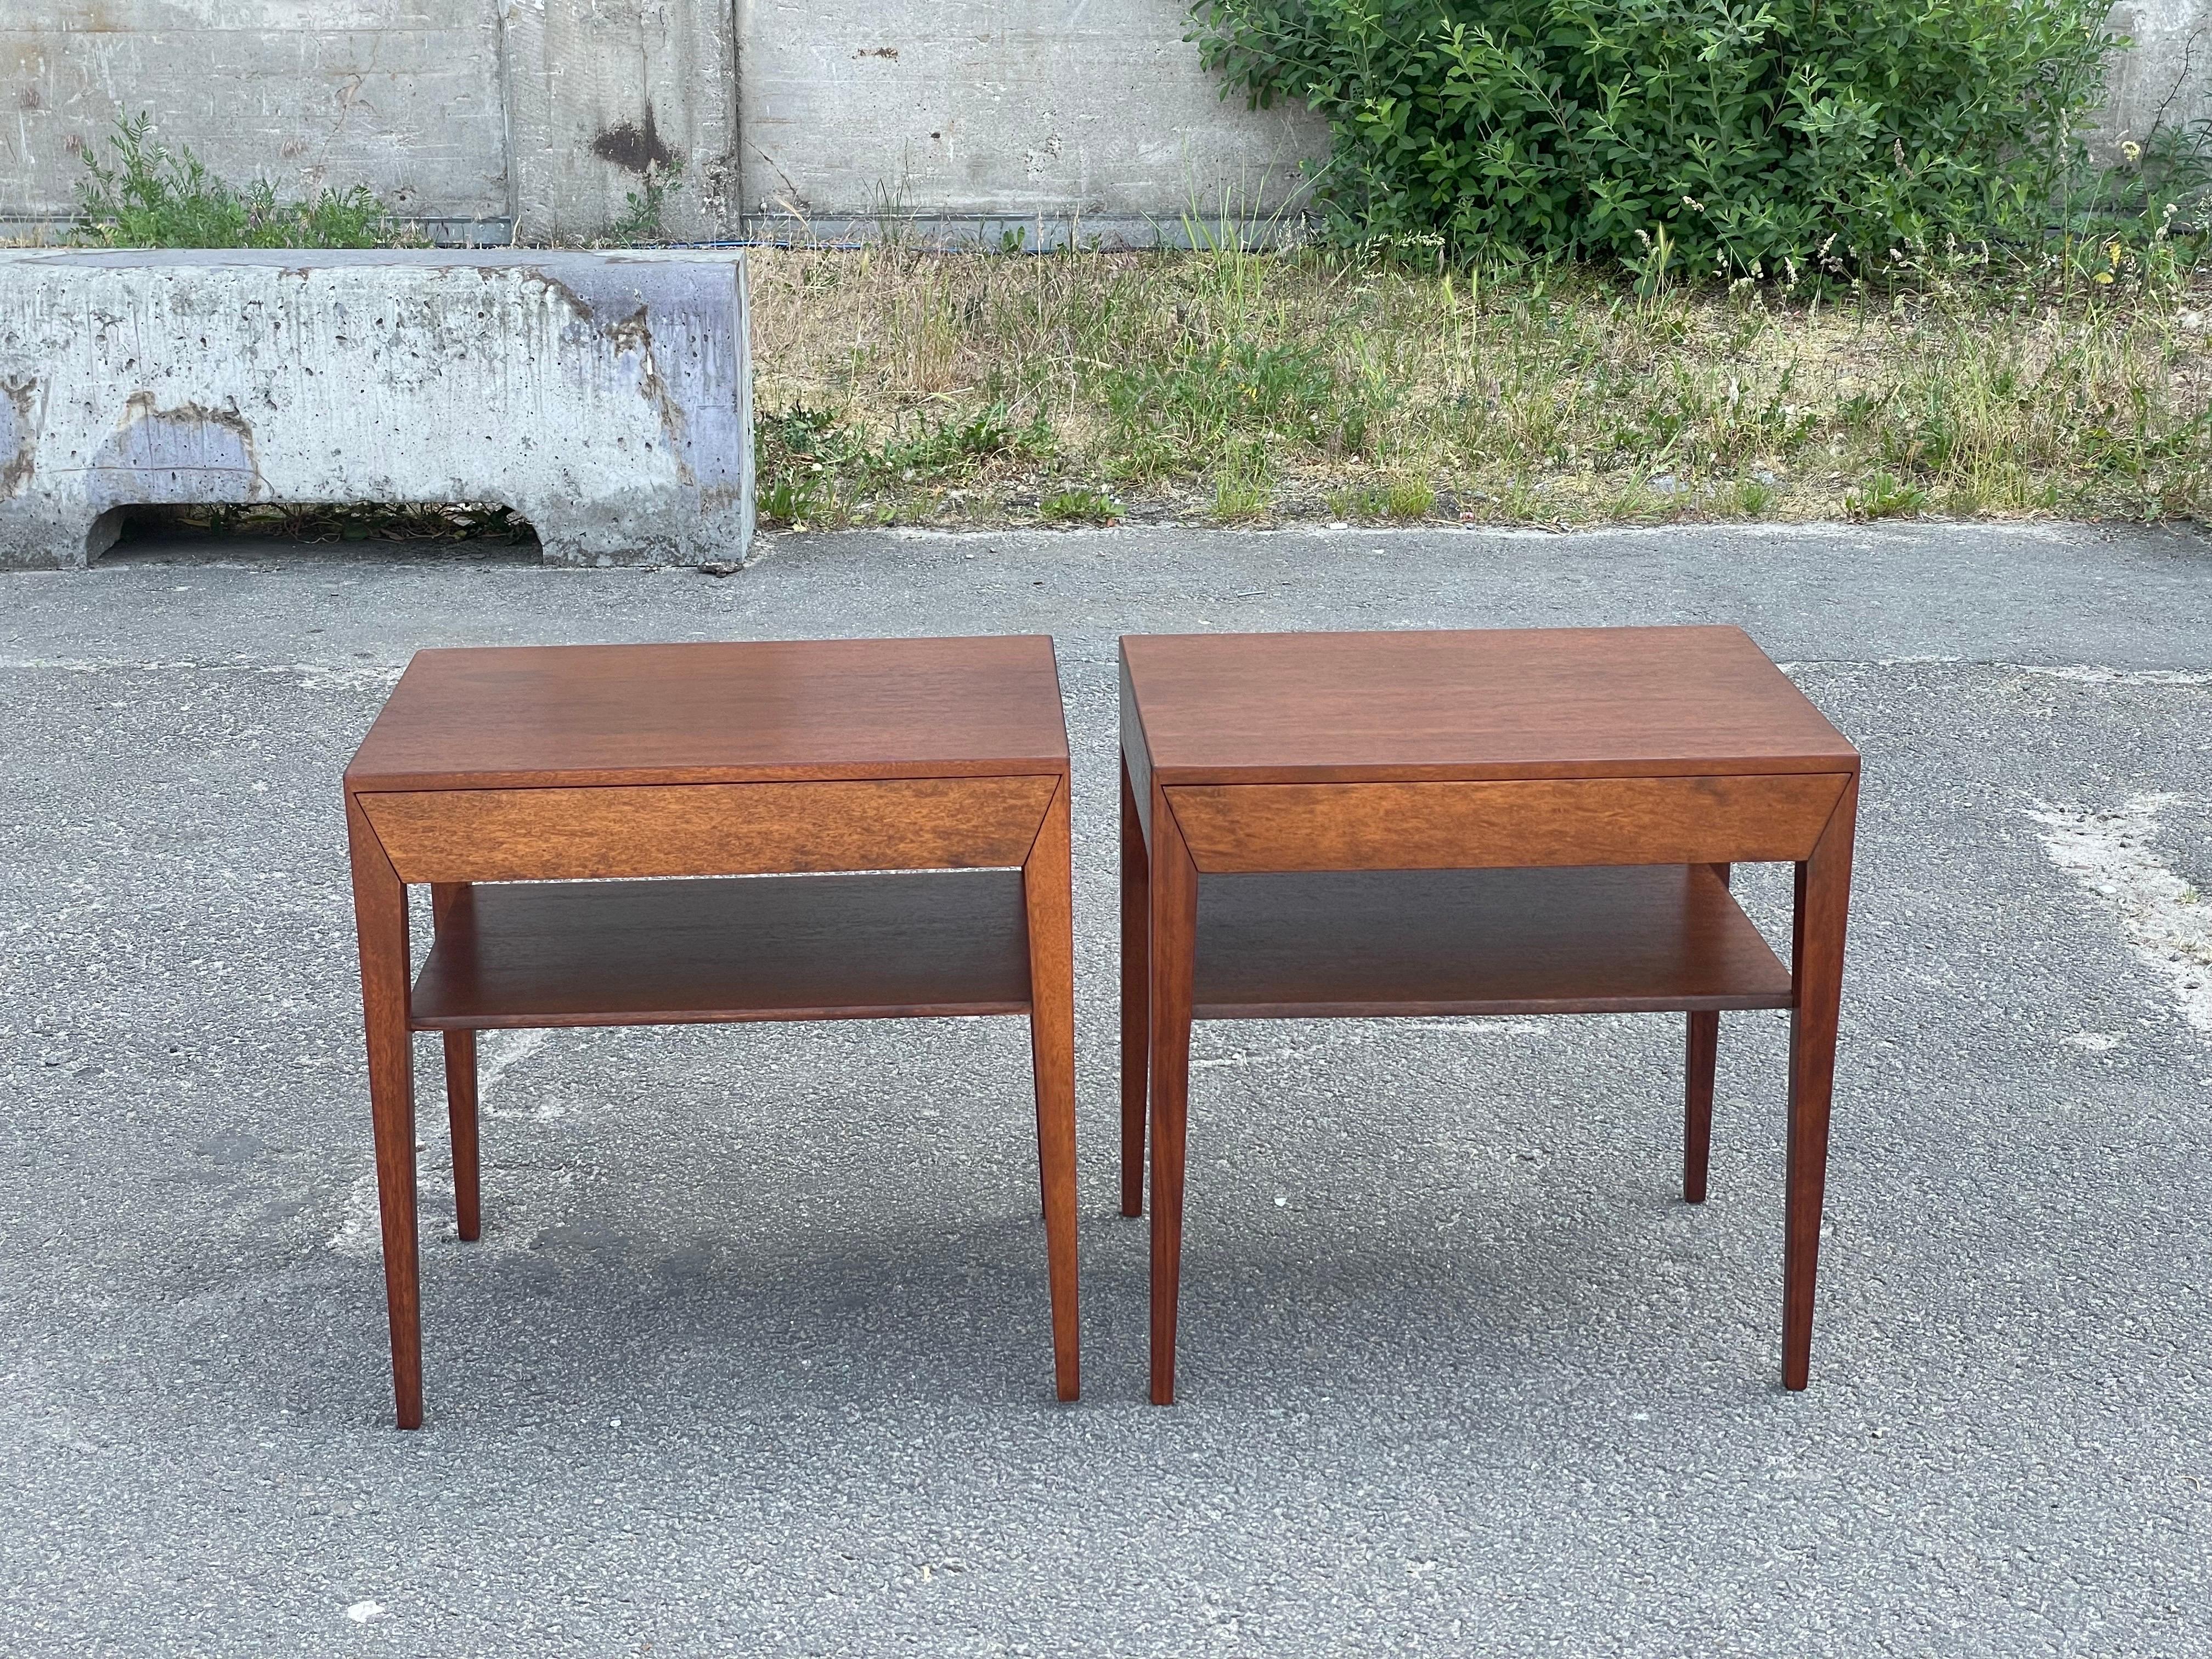 A remarkable find for lovers of mid-century modern design: a stunning pair of nightstands designed by Severin Hansen for Haslev Furniture of Denmark in the 1960s. These nightstands are a testament to timeless elegance and functional beauty. Crafted